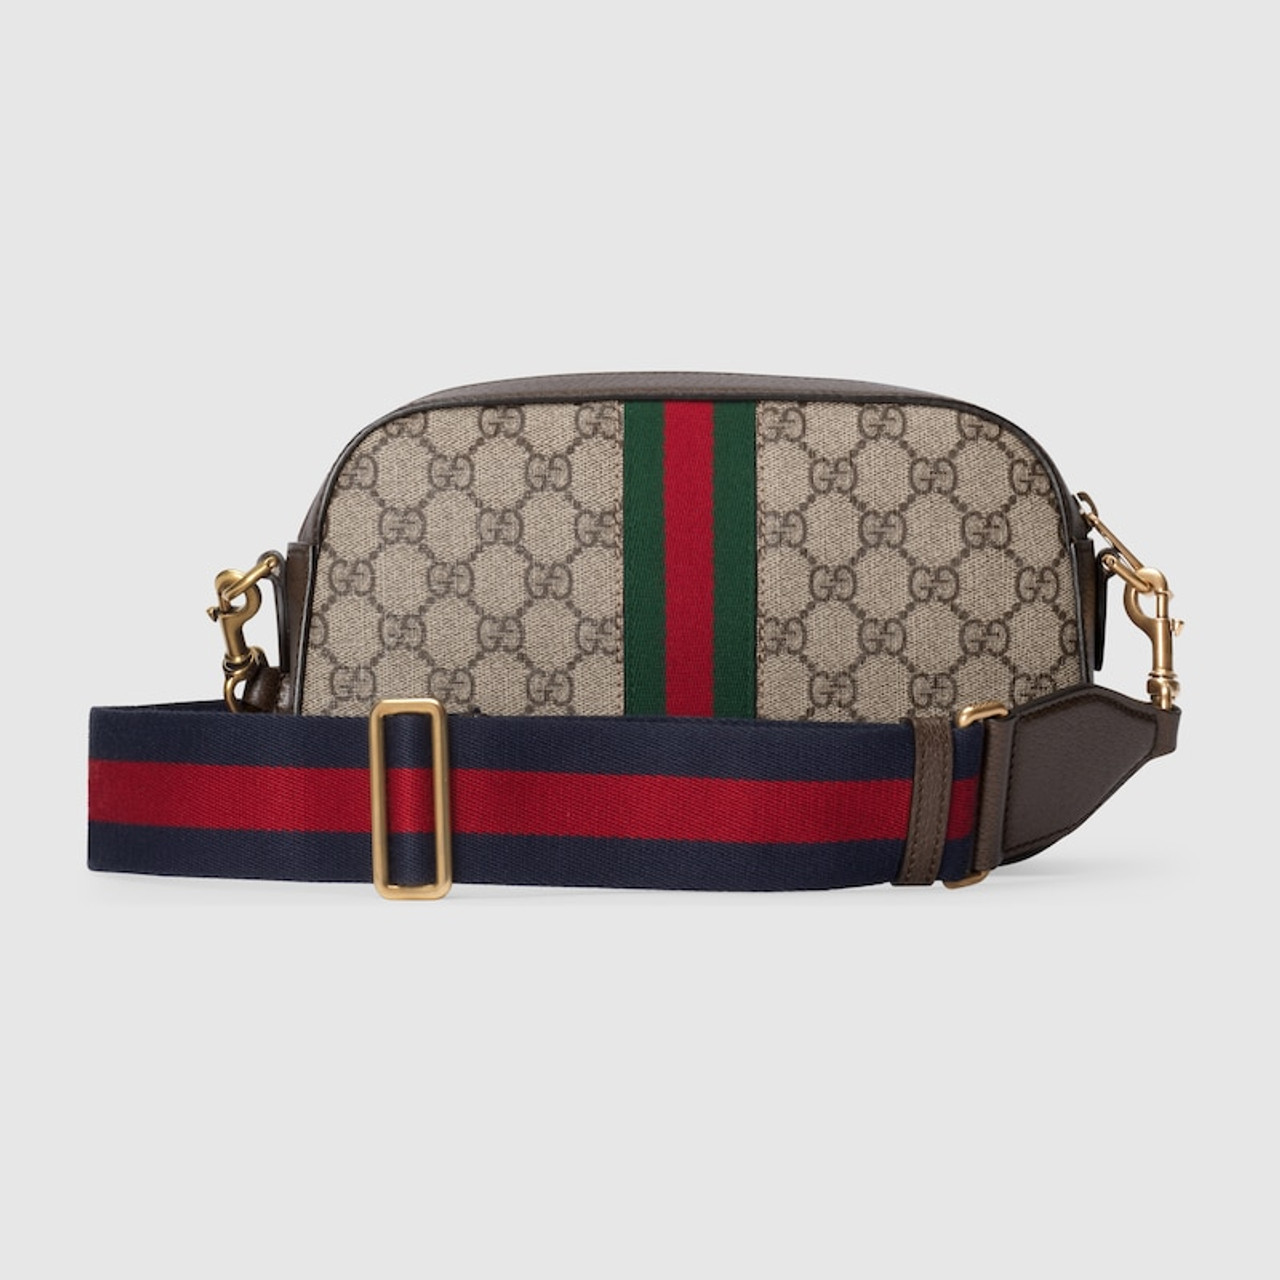 12 BEST and WORST GUCCI Bags To Buy 😮 - YouTube